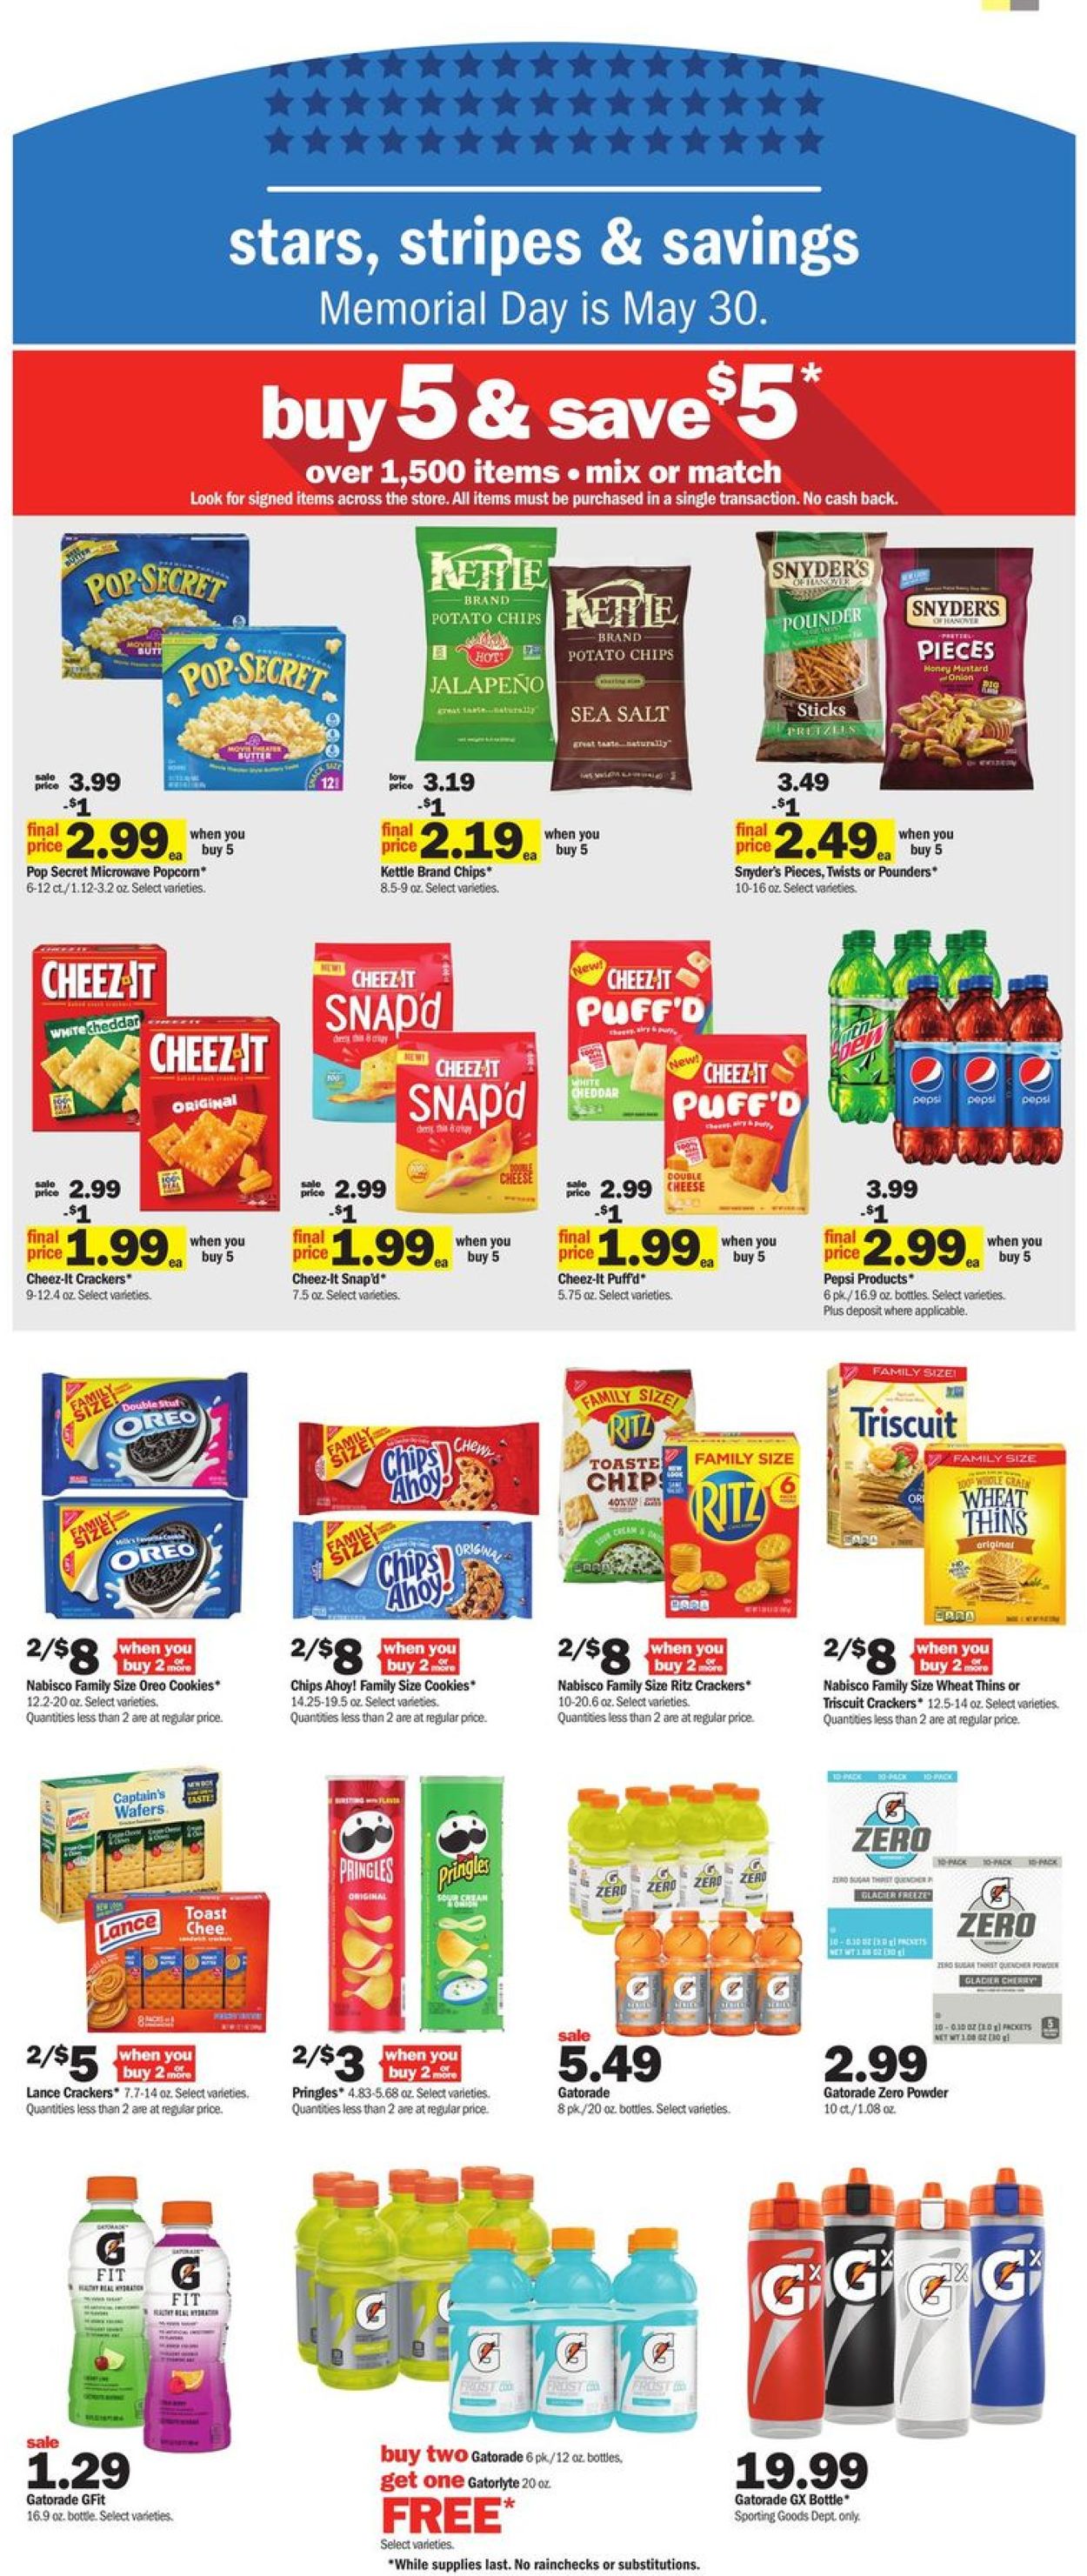 Catalogue Meijer from 05/29/2022